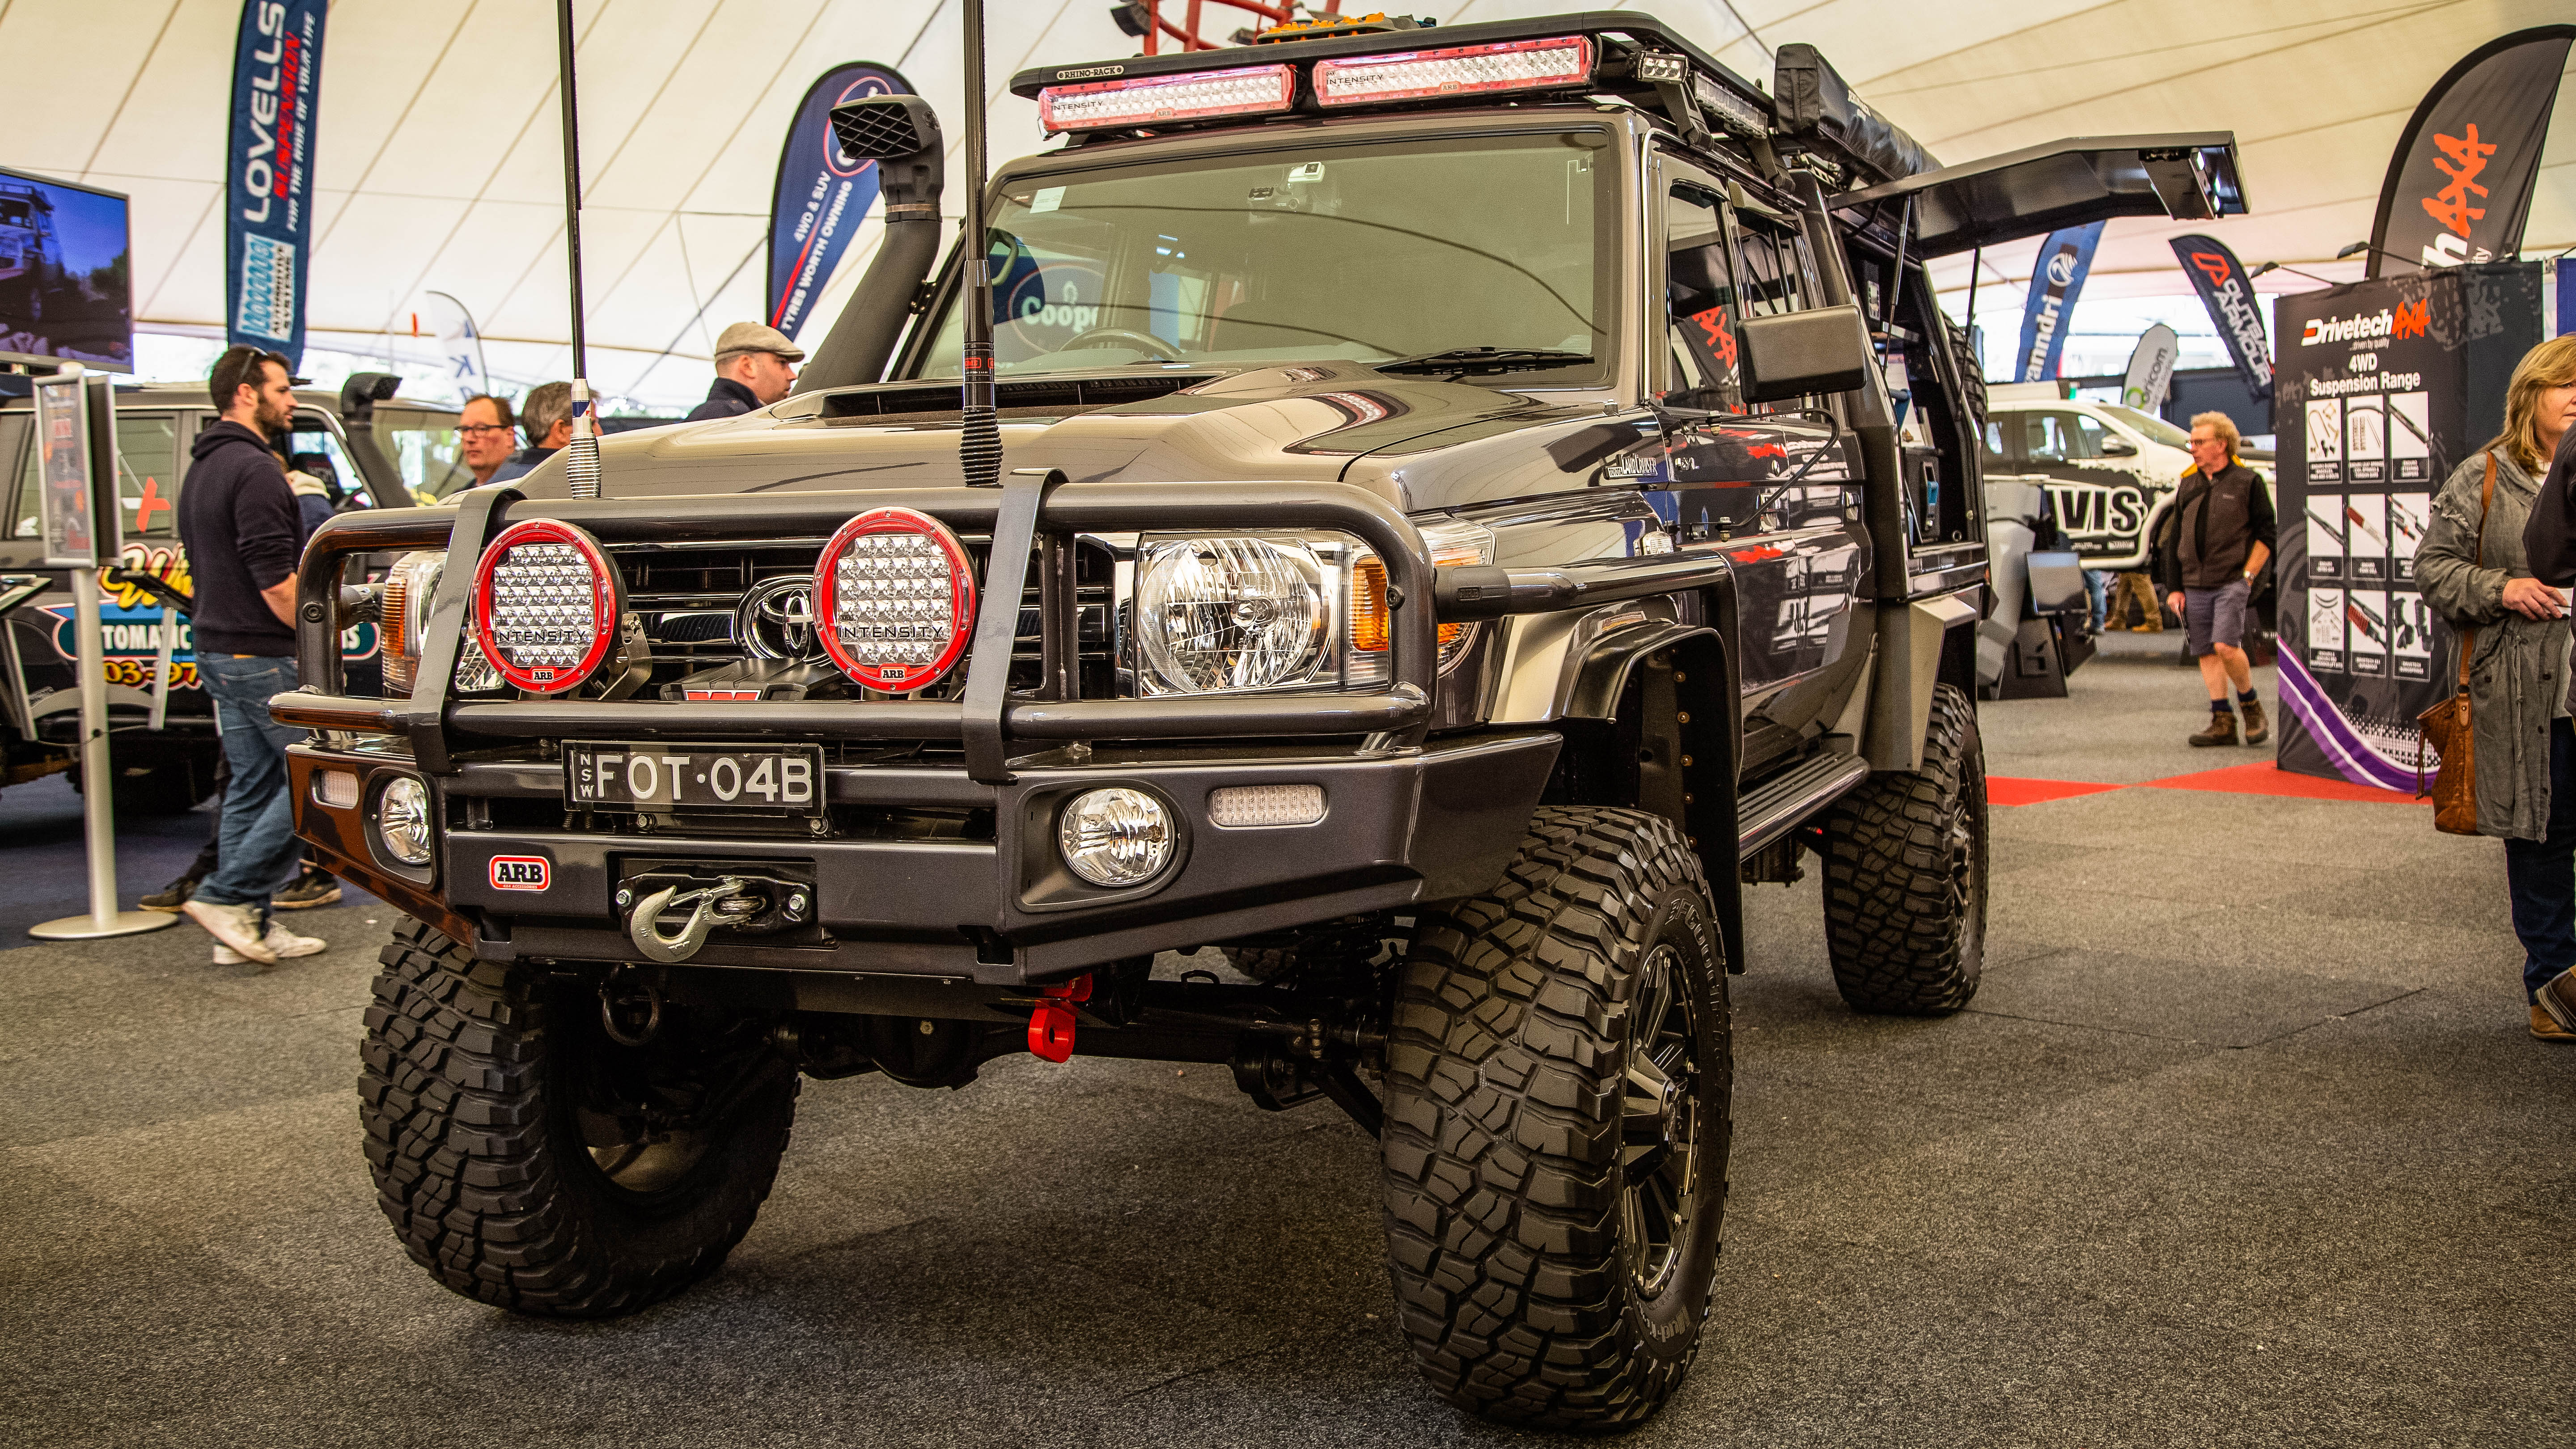 The 79 Series Landcruisers Of The Melbourne 4x4 Show Caradvice.